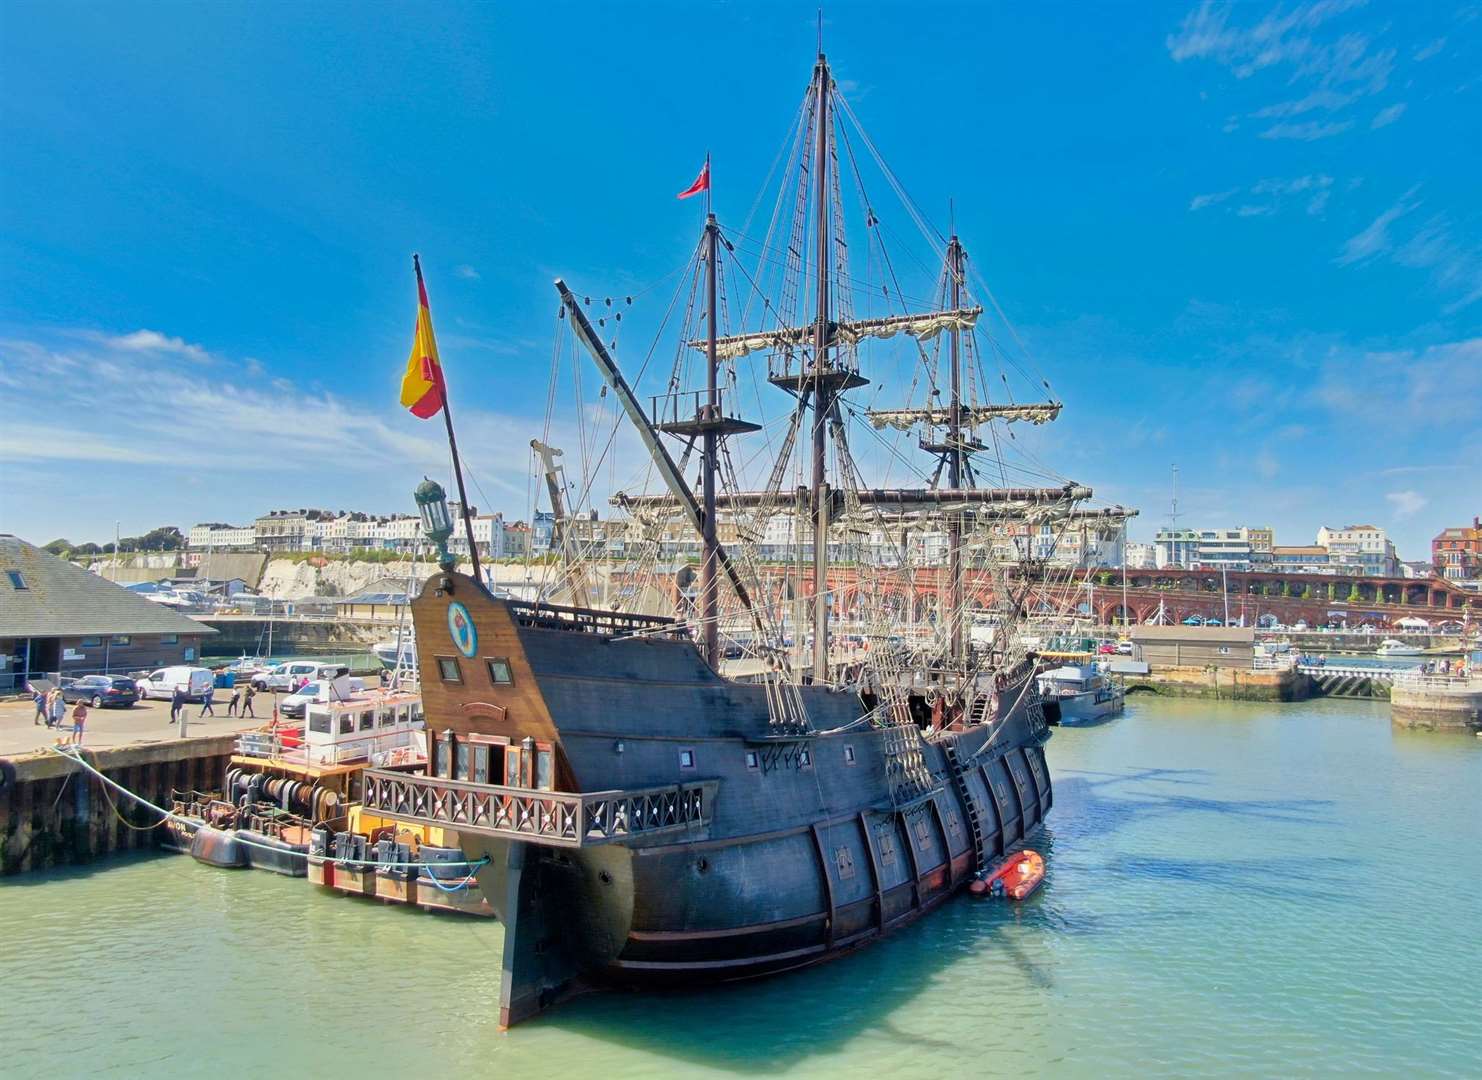 The ship at Ramsgate Harbour took 16 months to build. Picture: Swift Aerial Photography